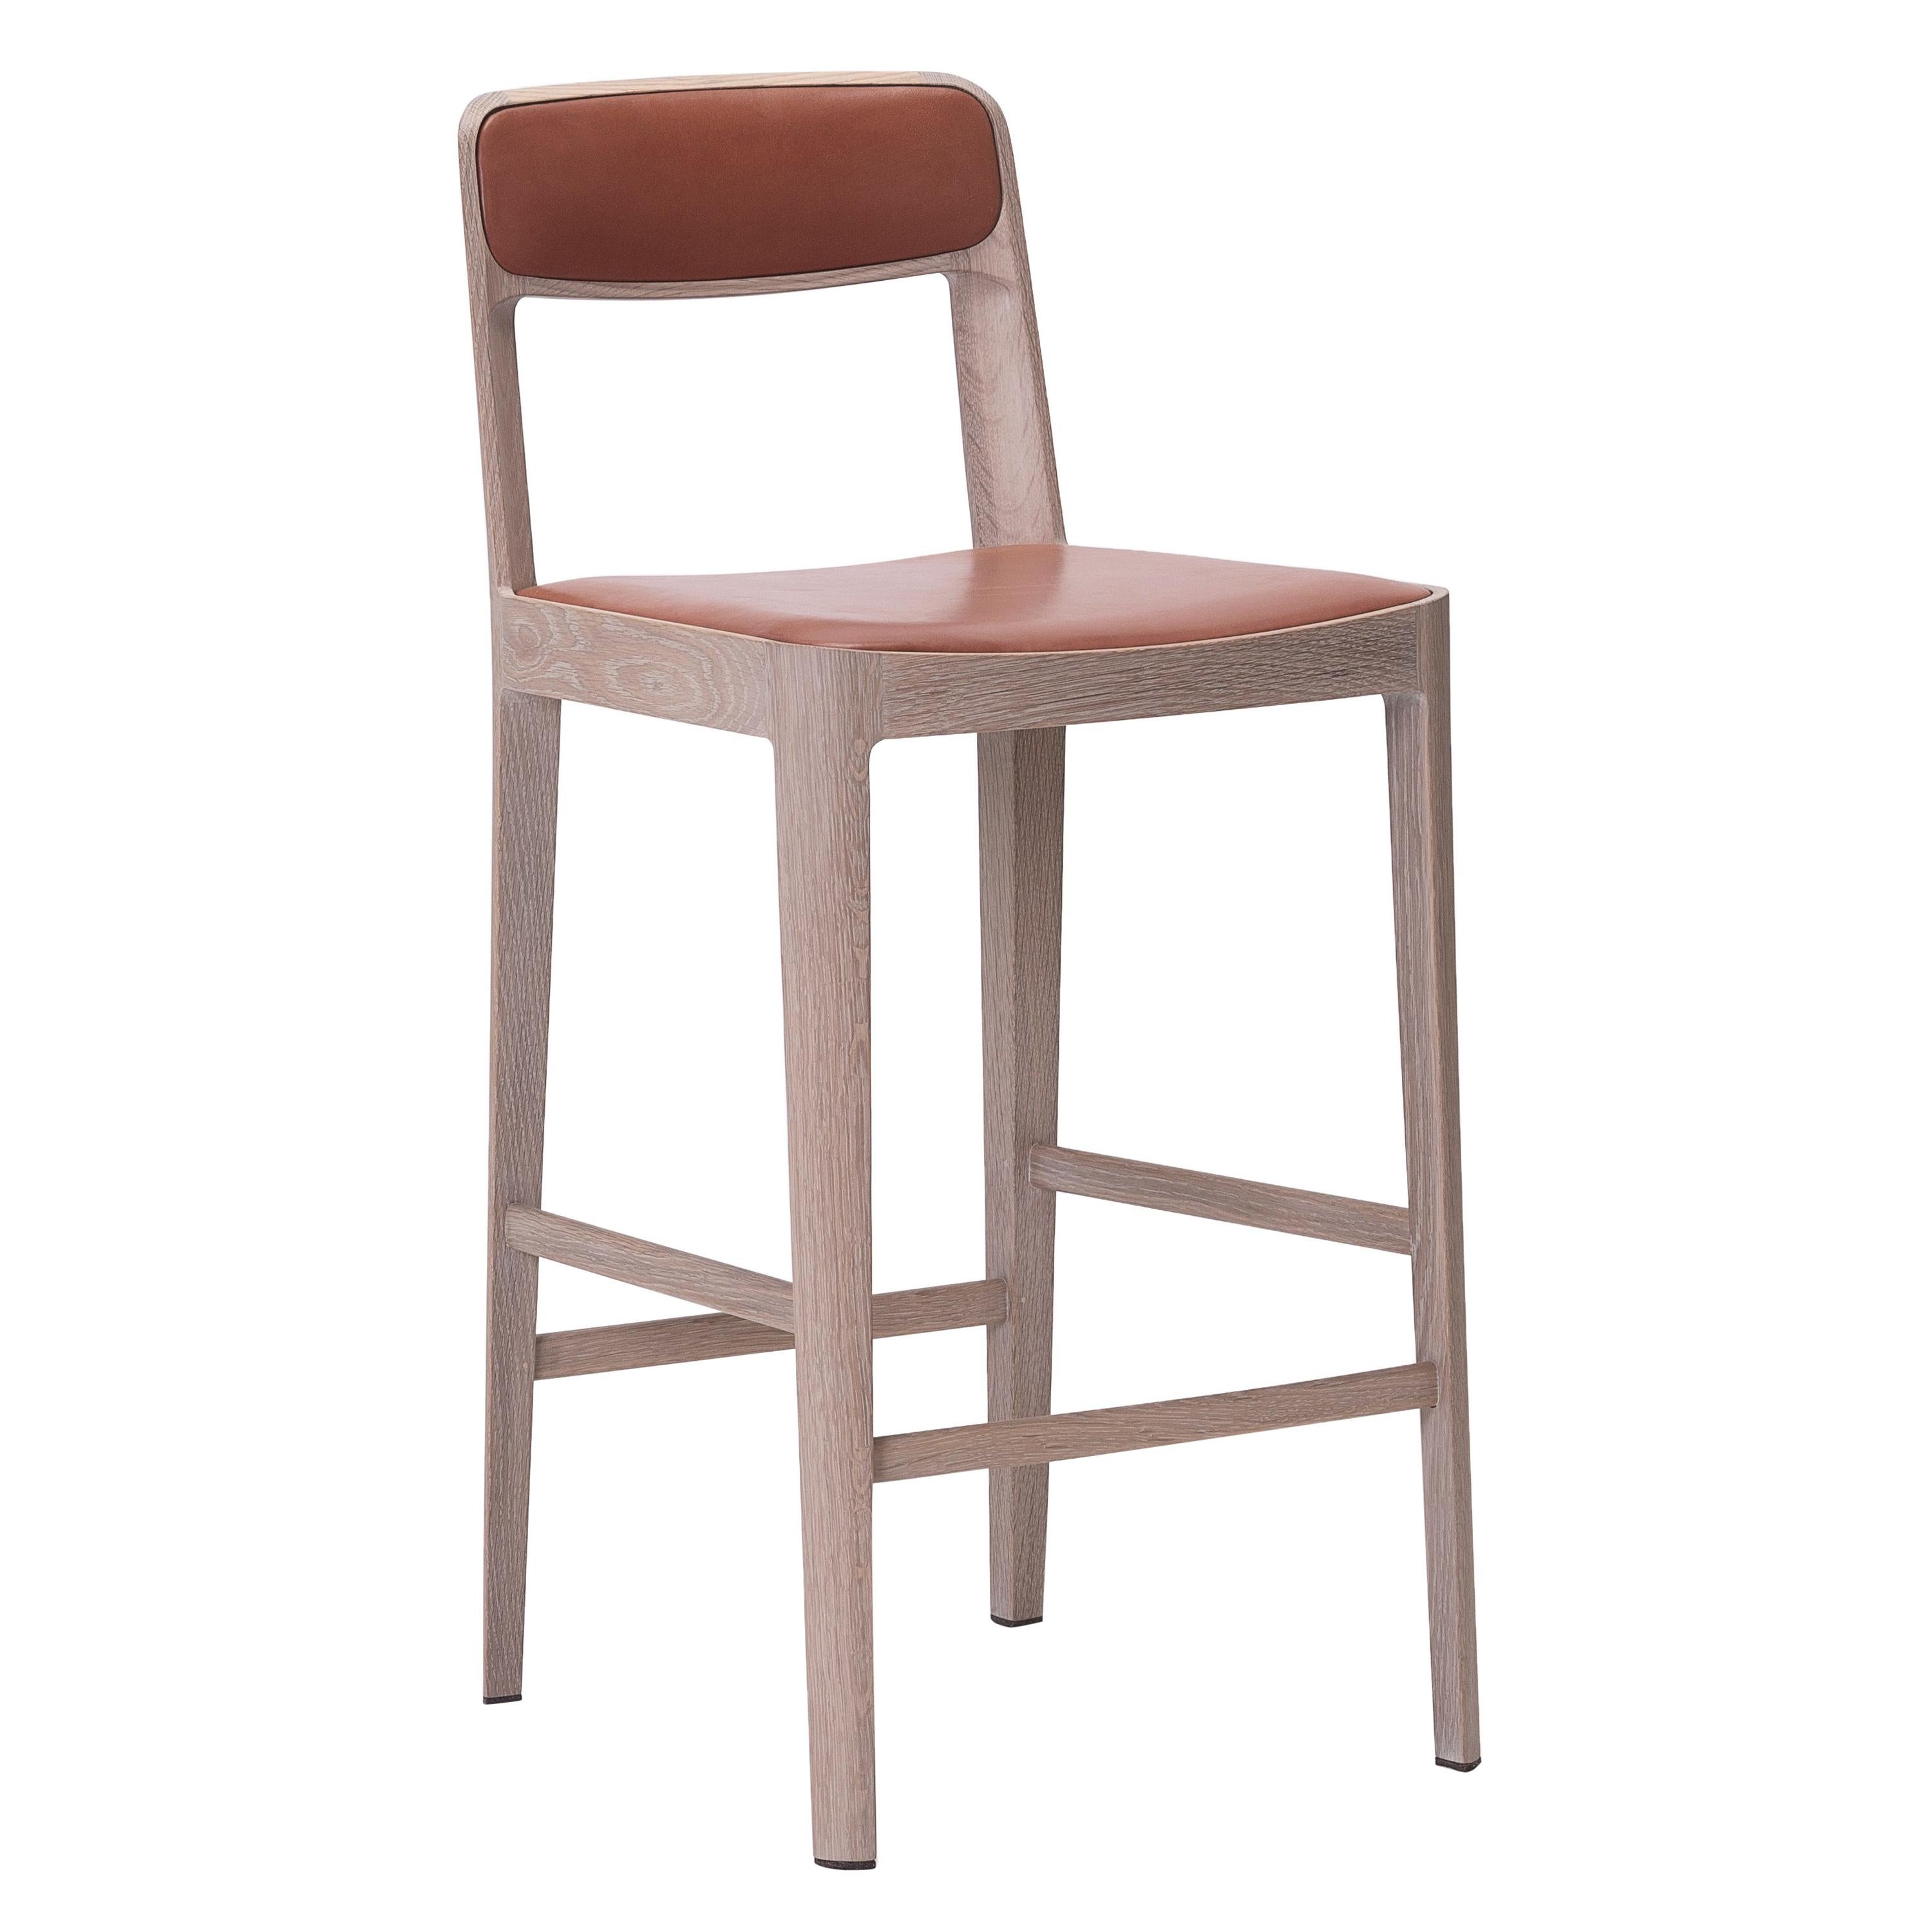 Linea Barstool, White Oak with Upholstered Seat and Backrest in Leather (Russet) For Sale